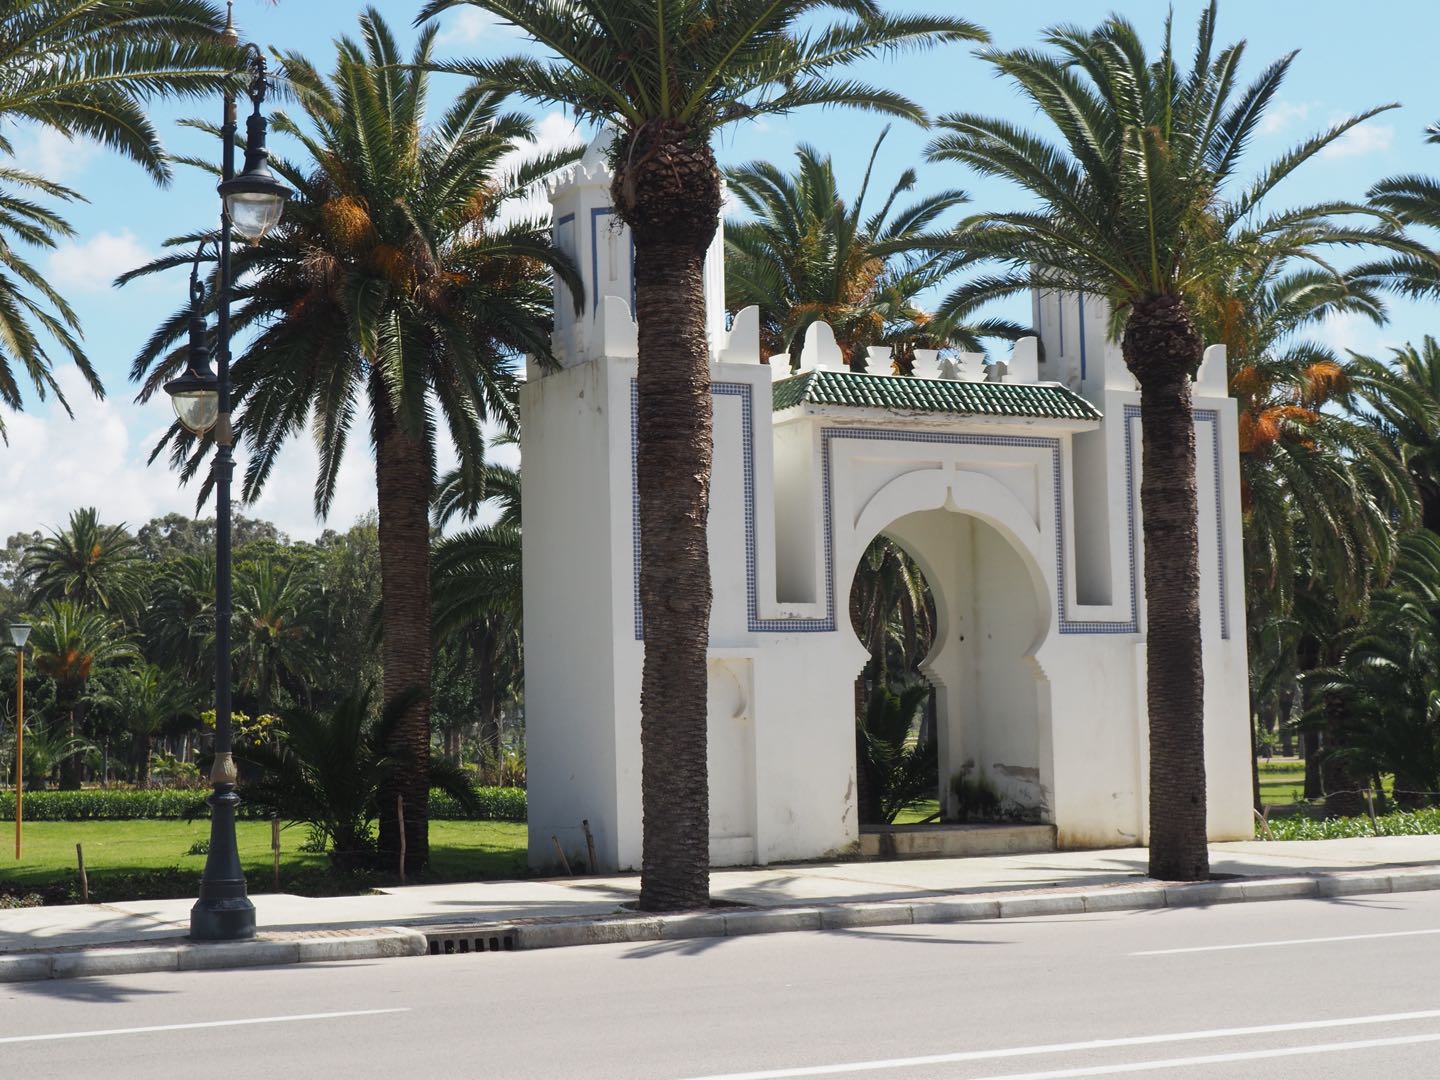 <p>View from across the street to the decorative garden gate</p>